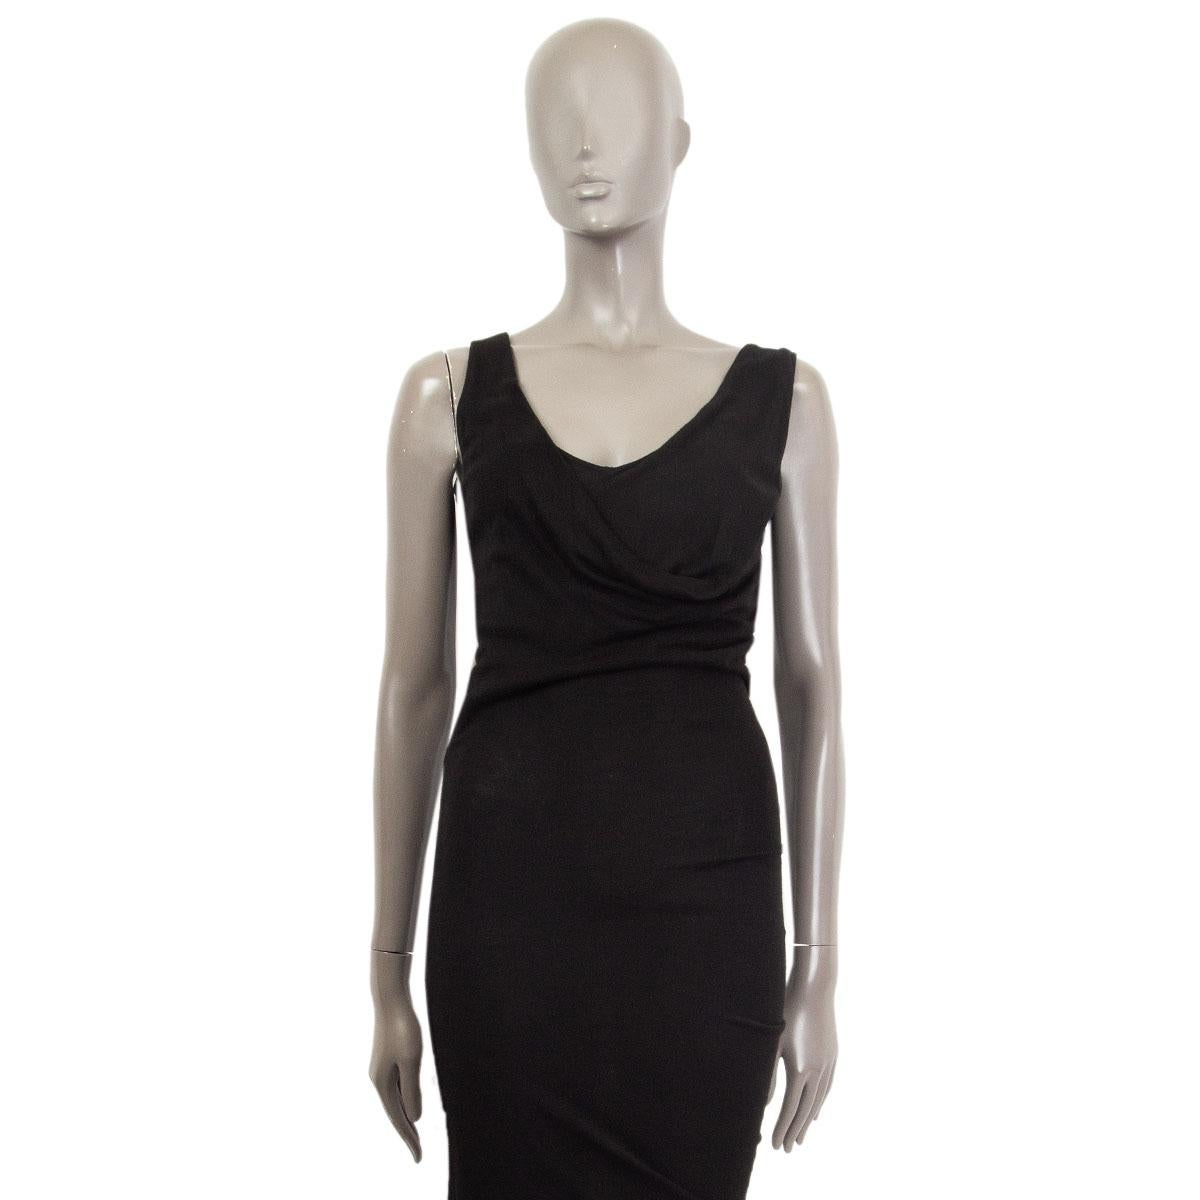 100% authentic Alexander McQueen sleeveless asymmetrical knit dress in black viscose (80%), cashmere (10%) and silk (10%) with a deep décolleté and a drape on the front. Unlined. Has been worn and is in excellent condition.

Tag